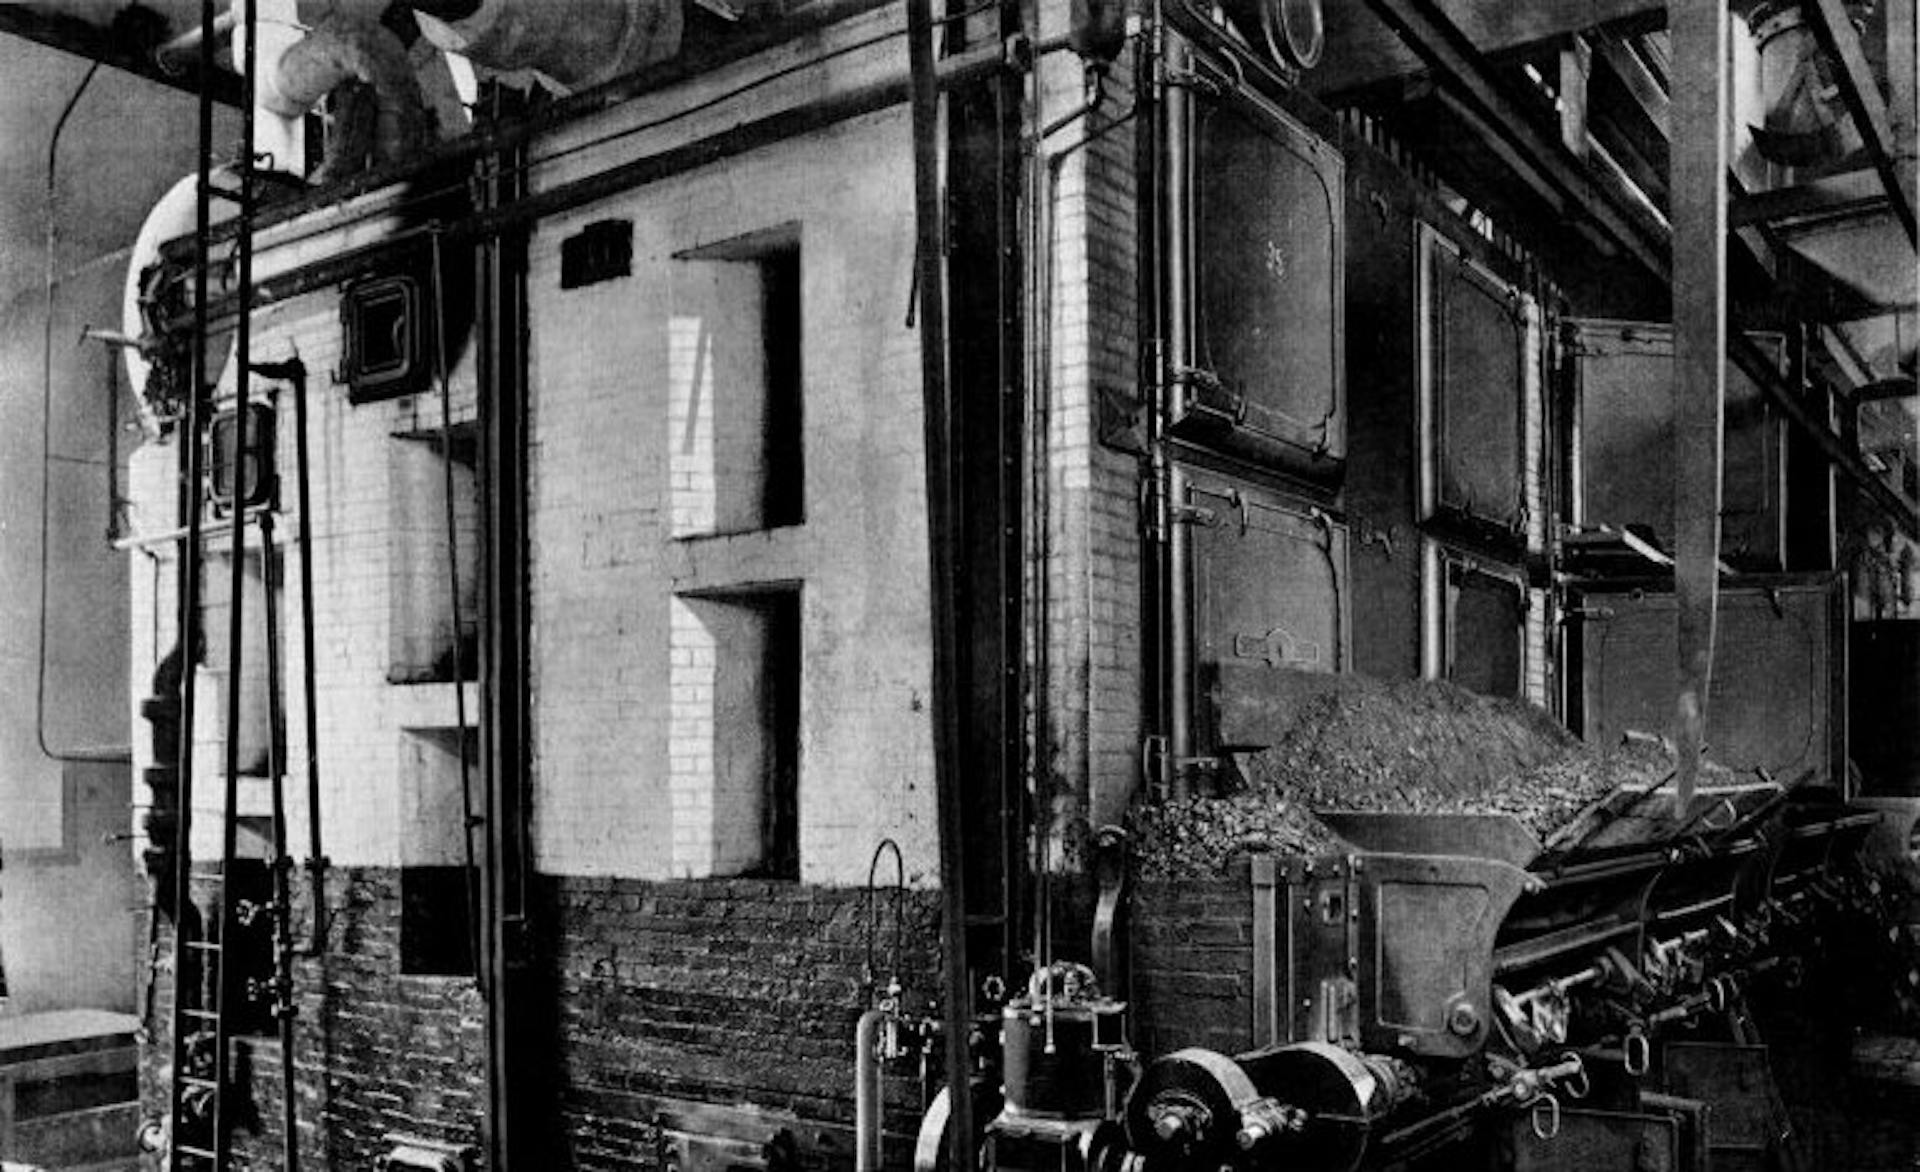 2400 Horse-power Installation of Cross Drum Babcock & Wilcox Boilers and Superheaters at the Westinghouse Electric and Manufacturing Co., East Pittsburgh, Pa.